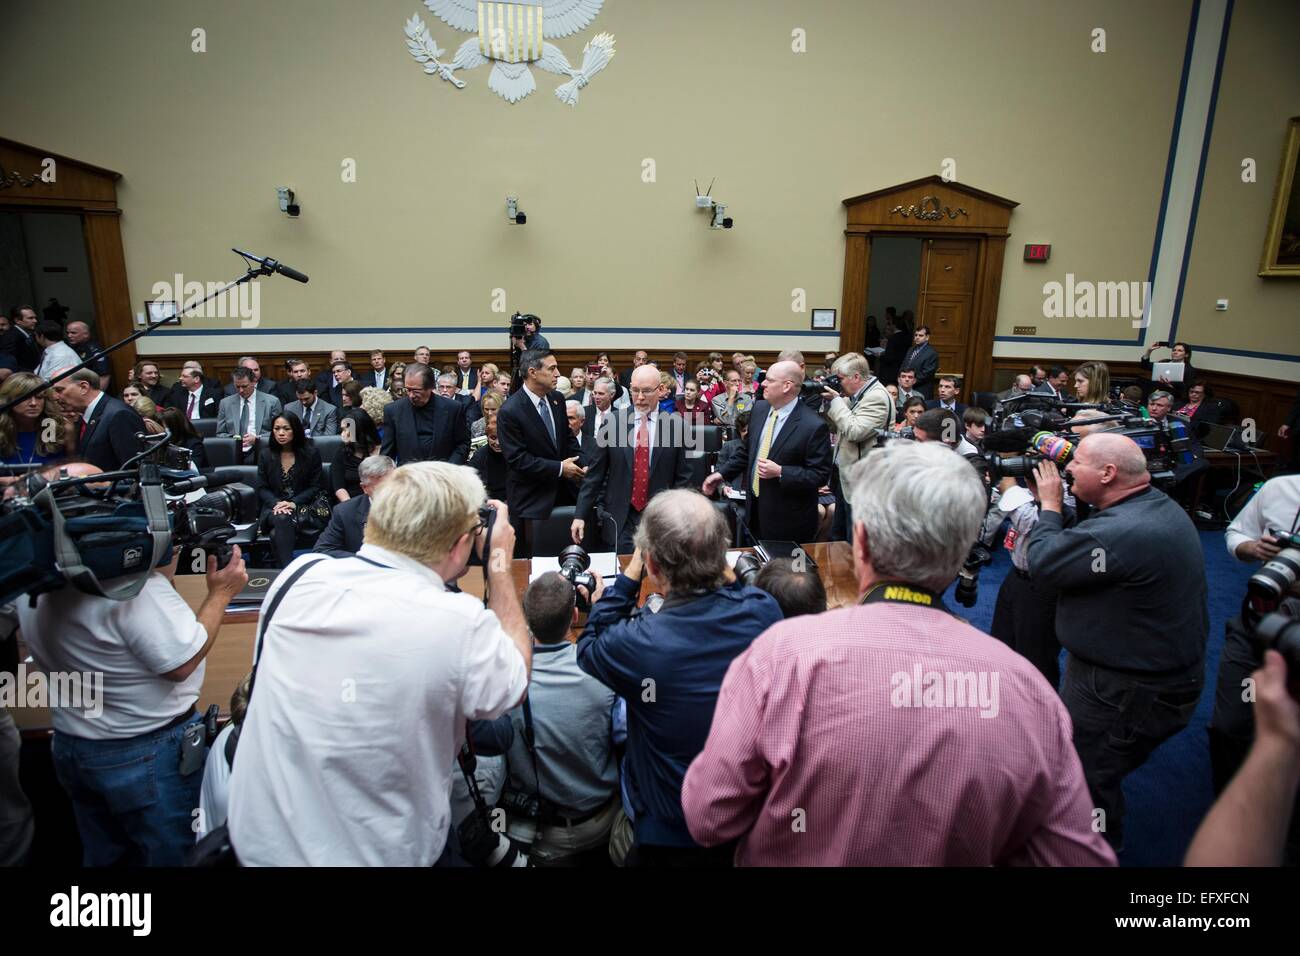 Members of the media surround witnesses before they testify at the House Oversight and Government Reform Committee hearing on the IRS targeting of political groups on Capitol Hill March 26, 2014 in Washington, DC. Stock Photo